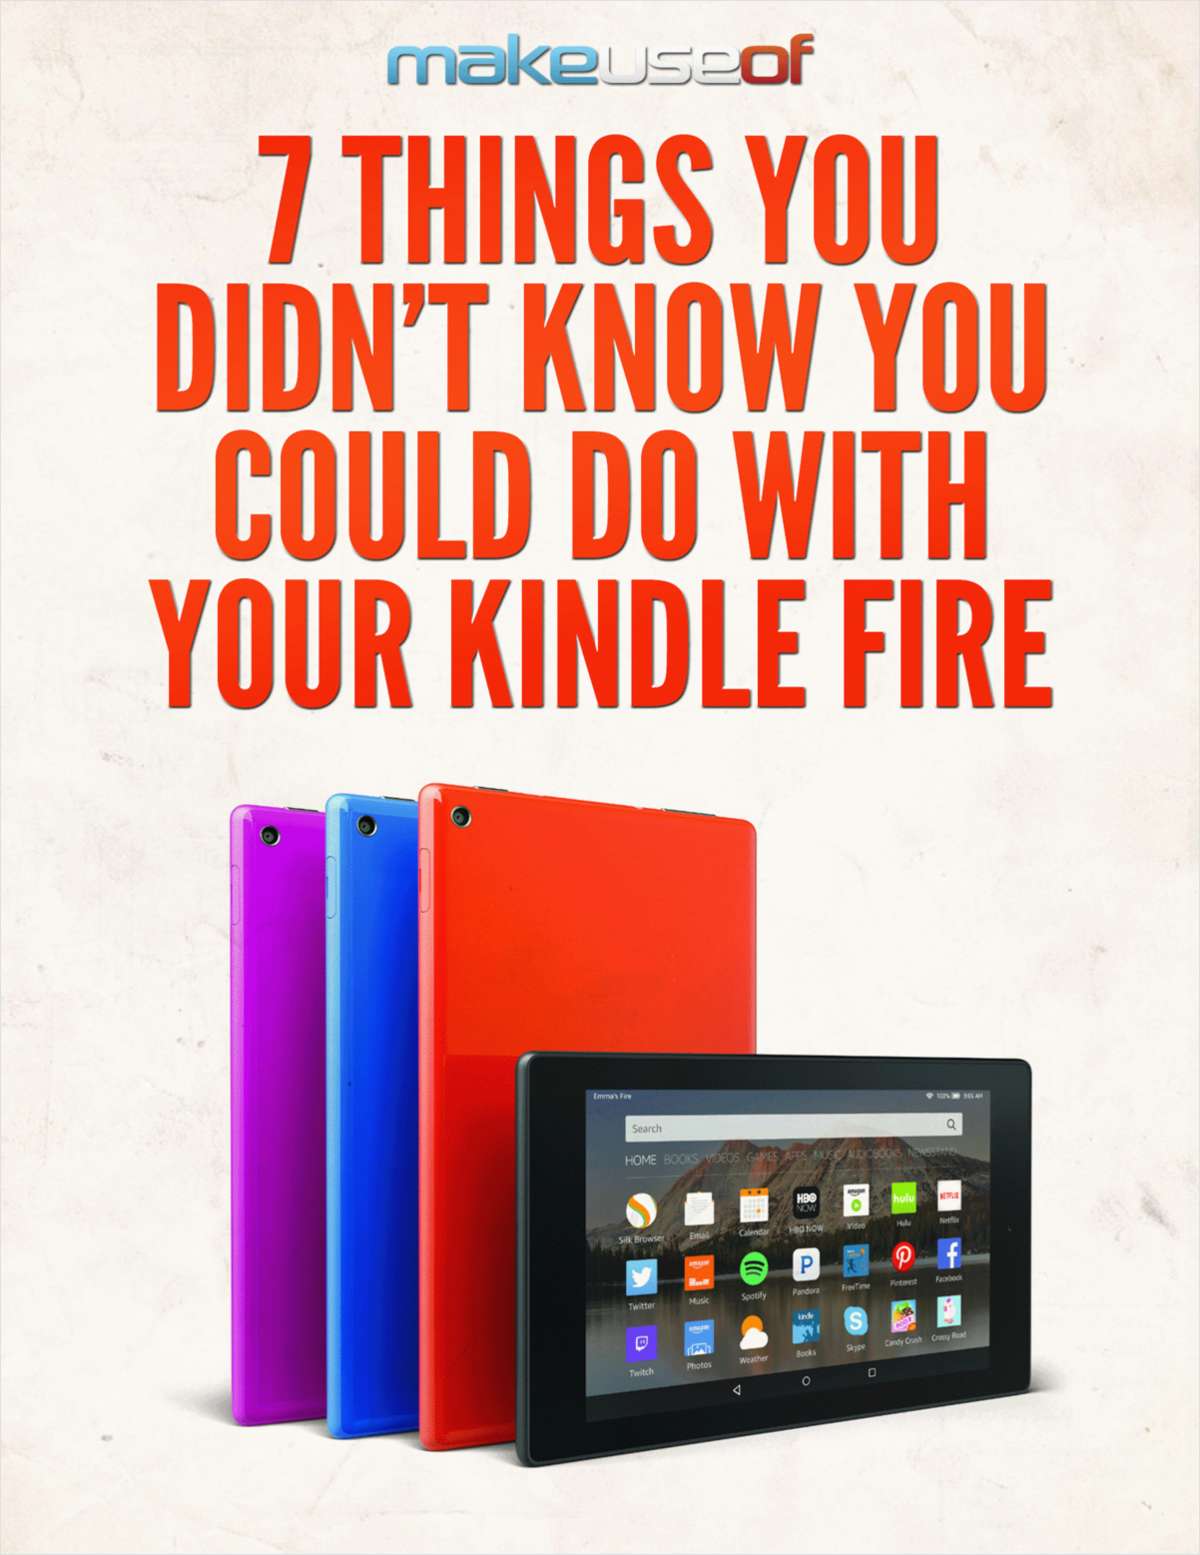 7 Things You Didn't Know You Could Do with Your Kindle Fire